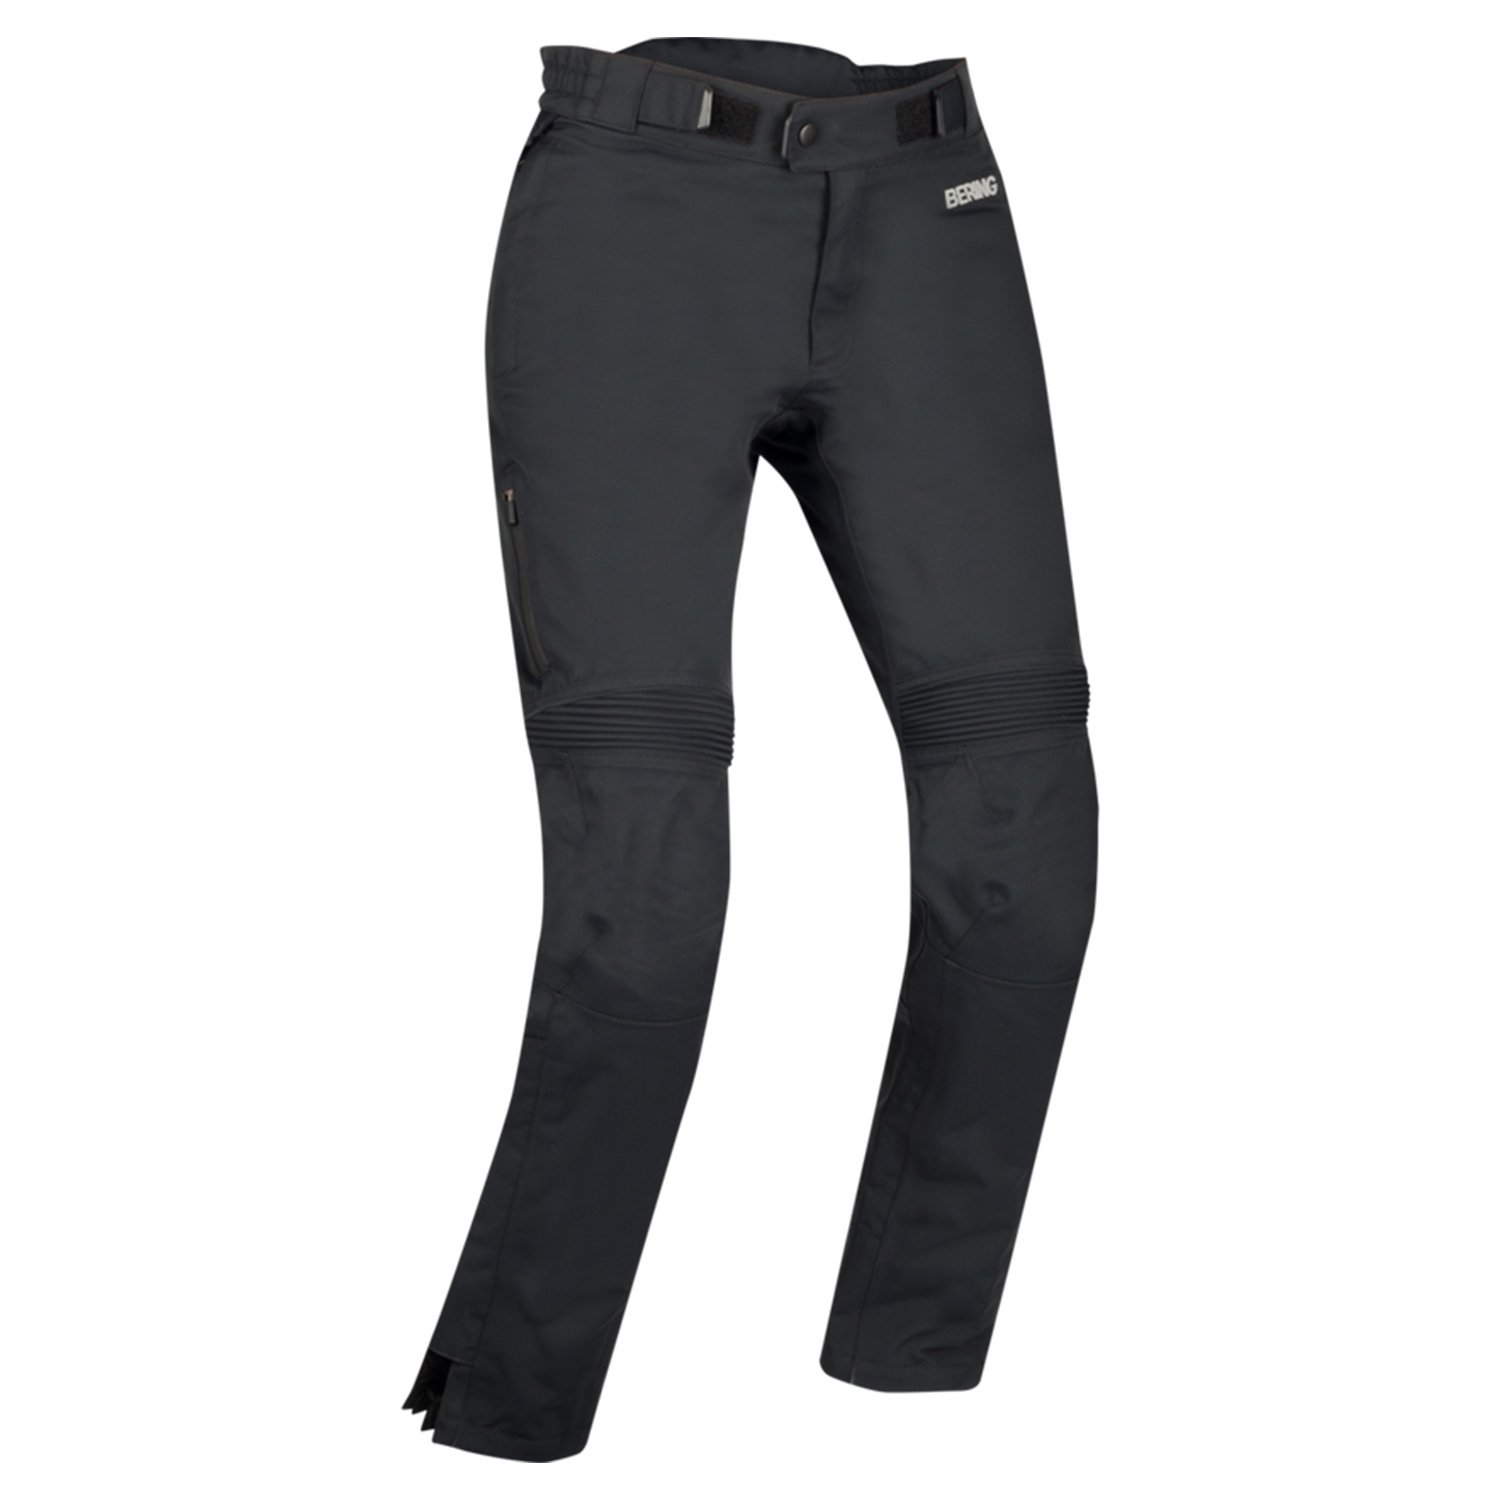 Image of Bering Lady Zephyr Trousers Black Size T2 ID 3660815180877